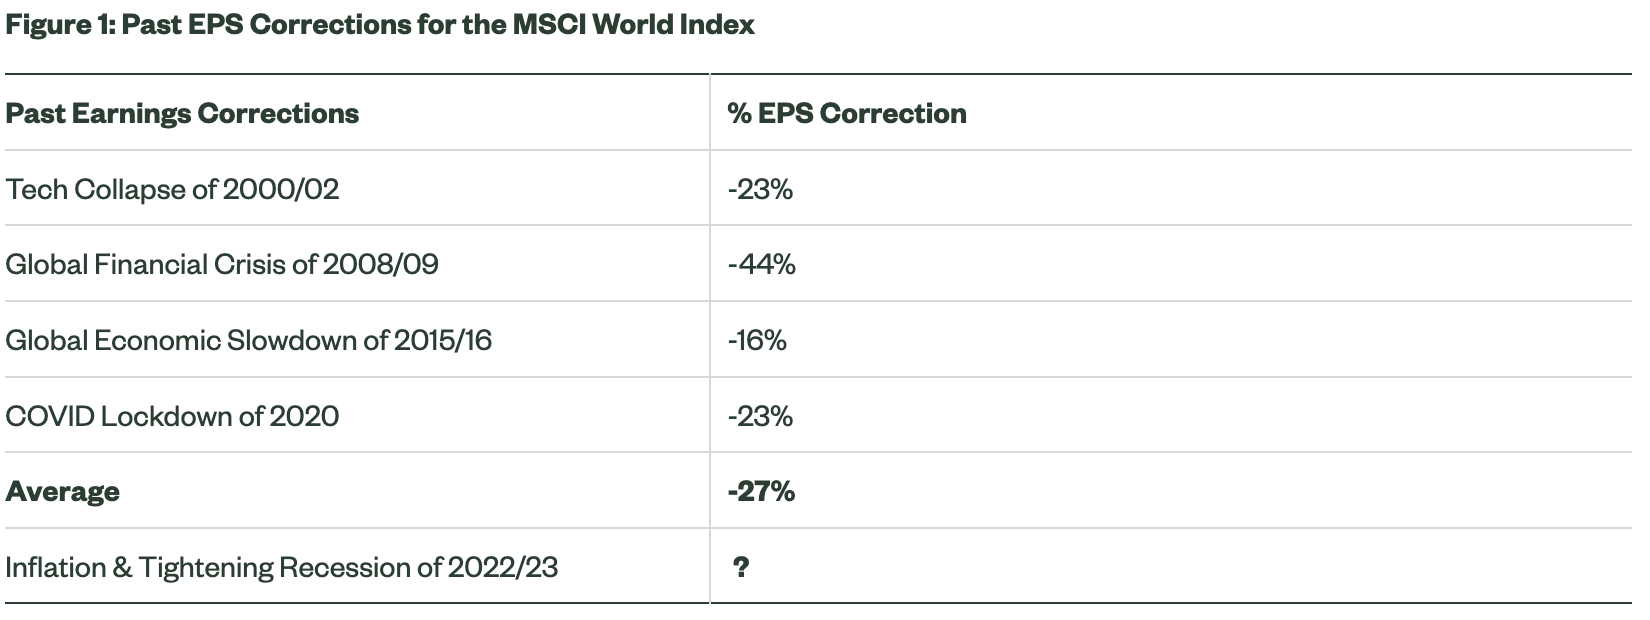 Source: State Street Global Advisors, Factset, as at 5 August 2022. Earnings corrections are defined as corrections of more than 15% corrections in earnings per share estimates for the next 12 months.